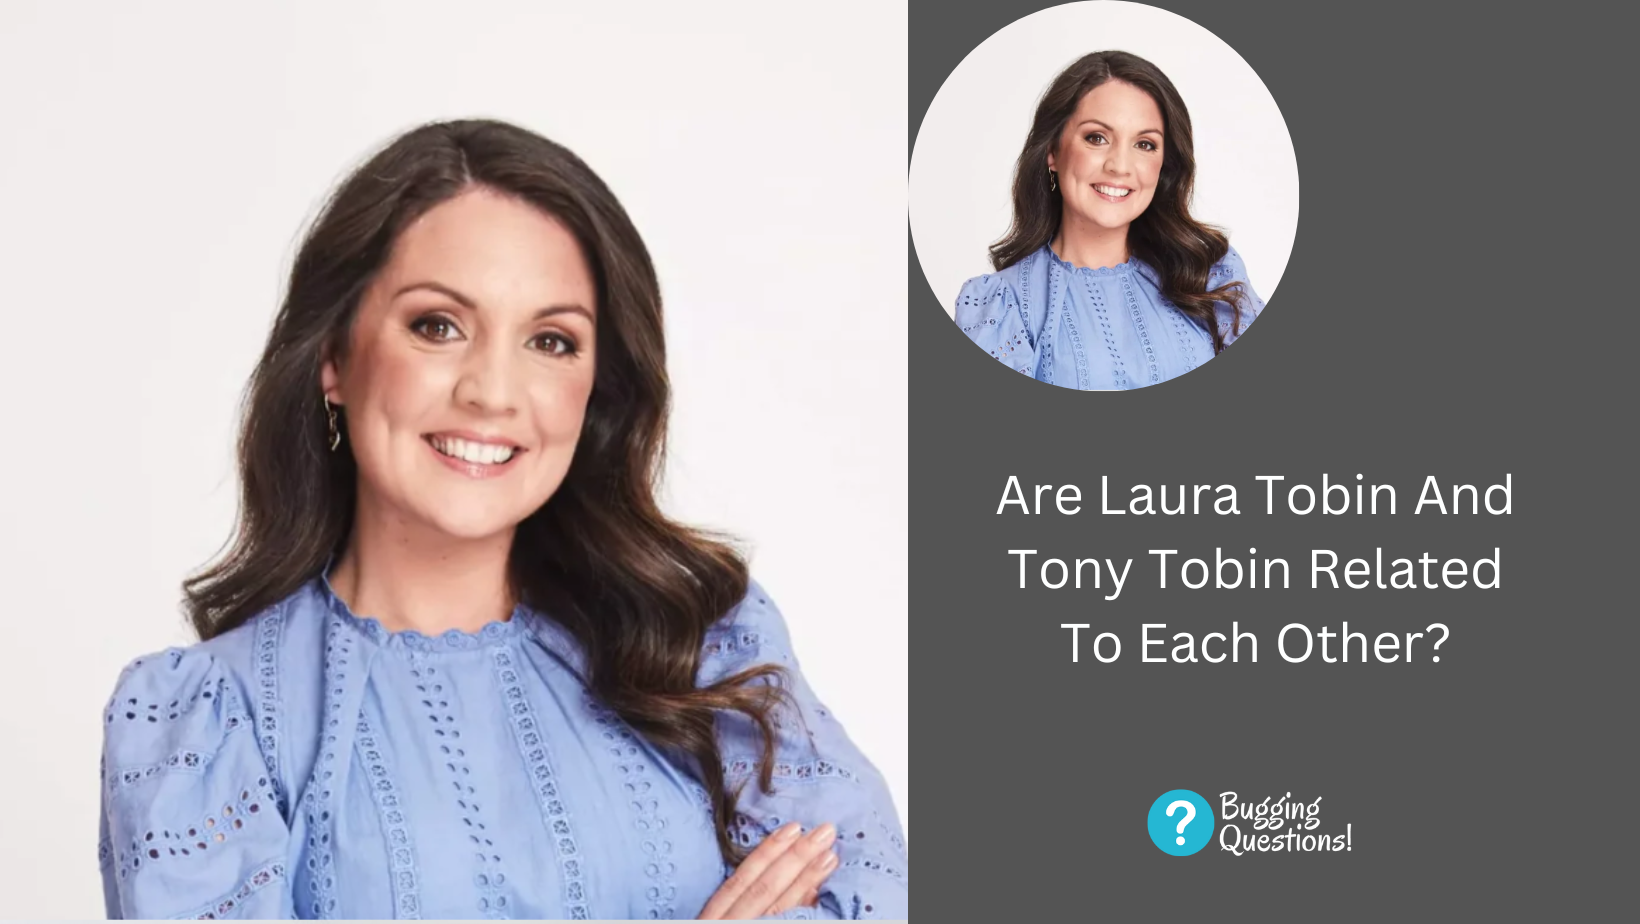 Are Laura Tobin And Tony Tobin Related To Each Other?